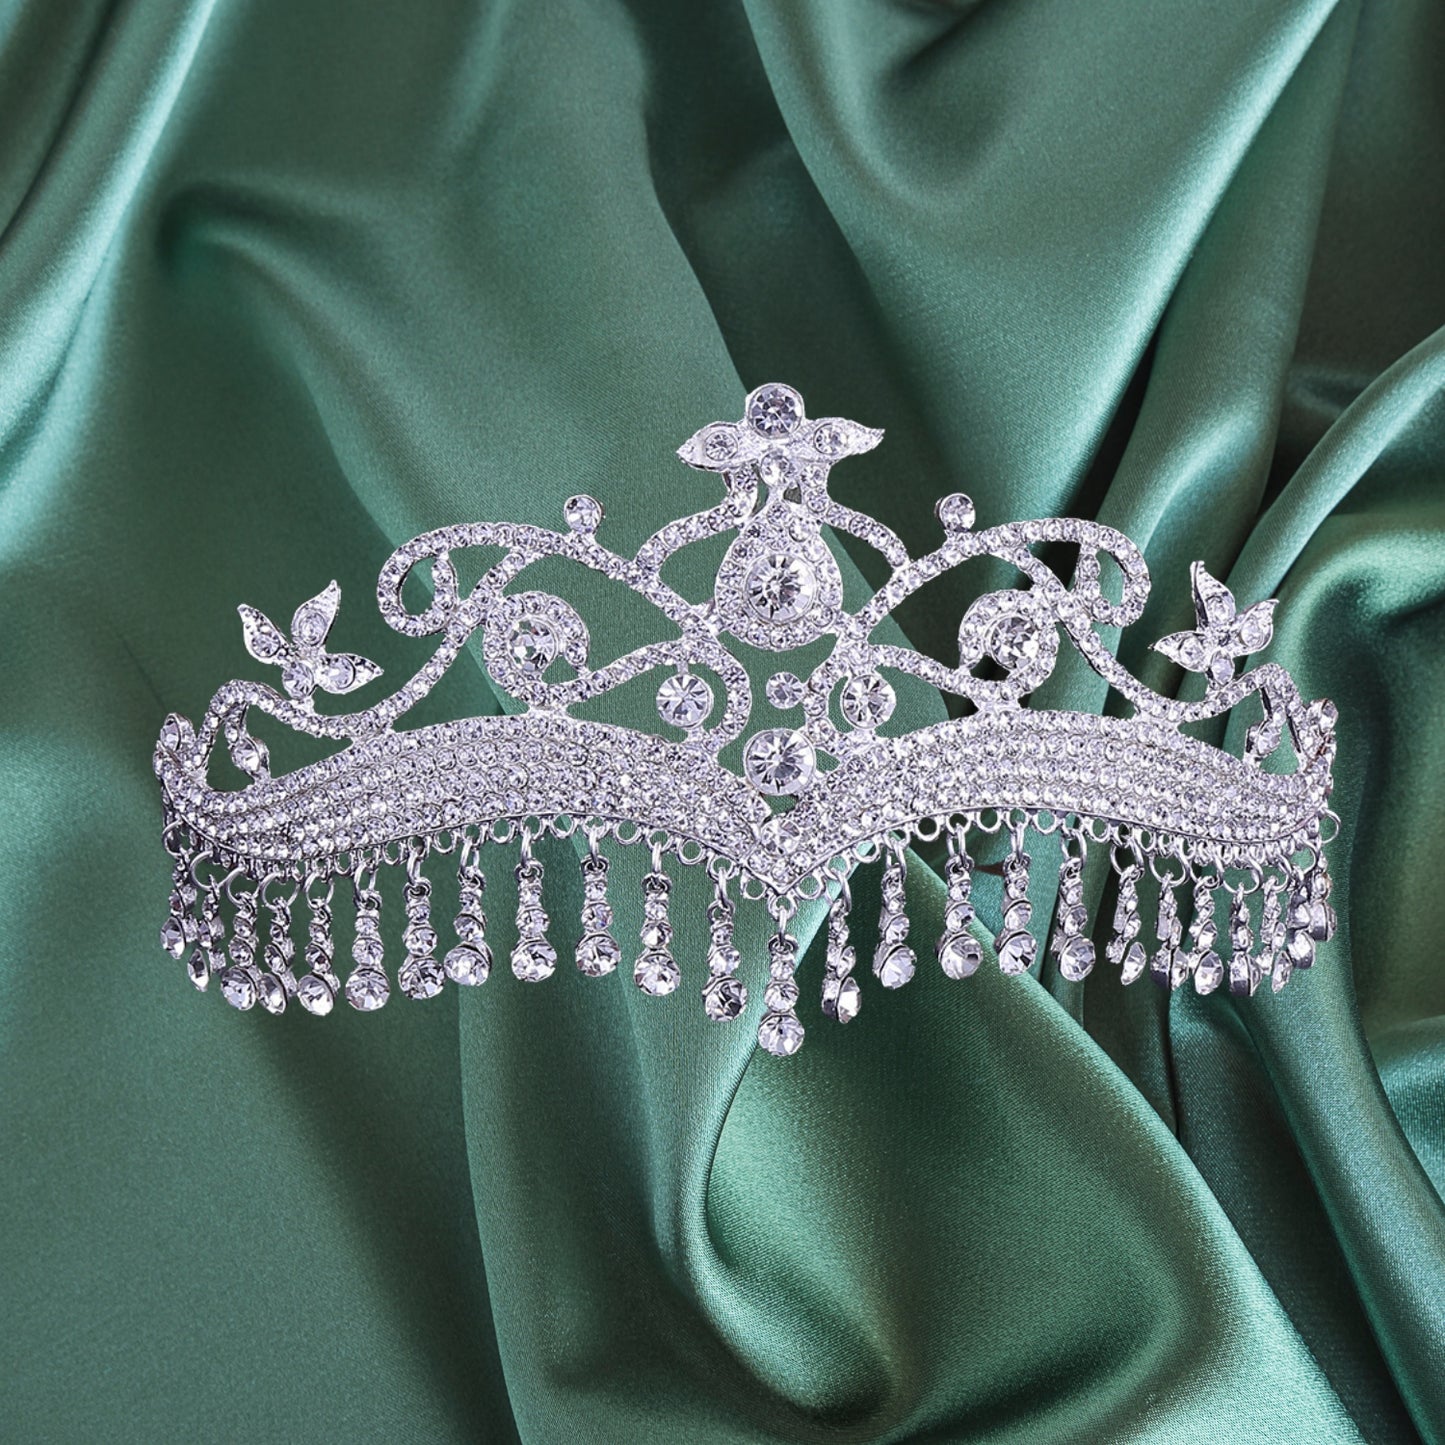 Princess Tiara Crown for Women Girls,Pageant Wedding Tiara for Bride,Crystal Bridal Hair Accessories for Quinceanera Prom Birthday Party,Silver